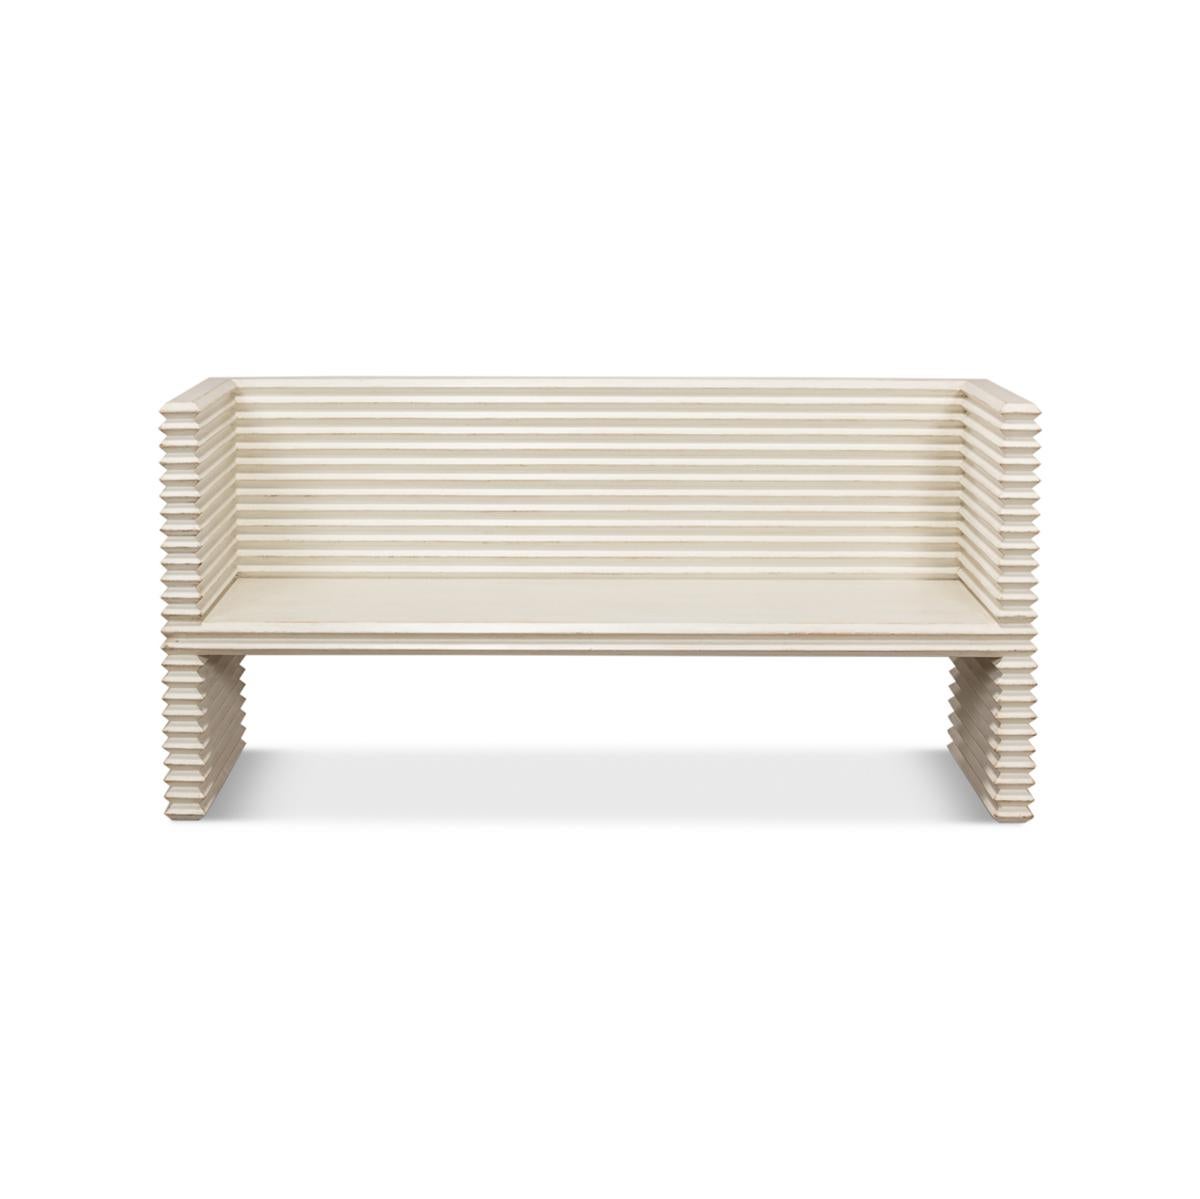 Crafted with precision and painted in a soothing antique white, this bench exudes rustic charm. The reclaimed pine adds character, telling a story of history and sustainability. Elevate your home décor with this unique piece that effortlessly blends